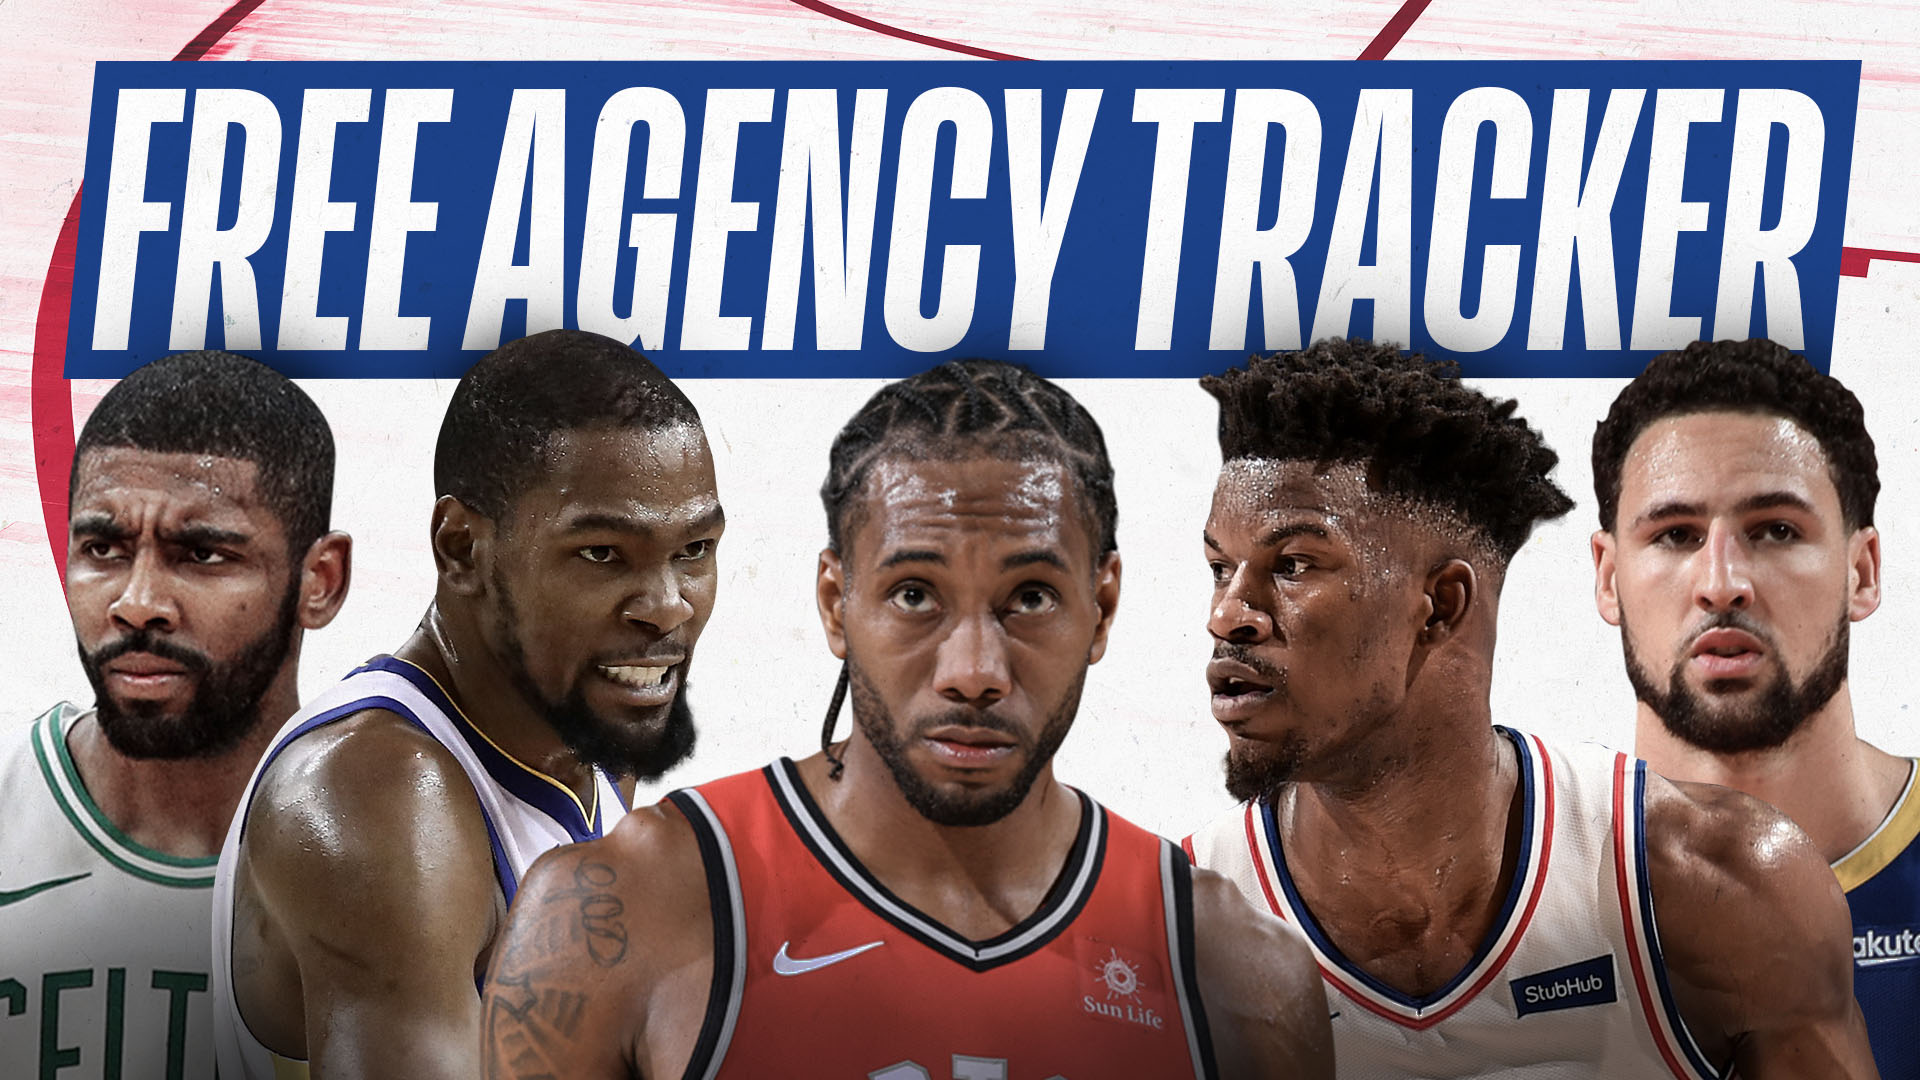 2019 NBA Free Agency tracker: Available players, news and updates | NBA